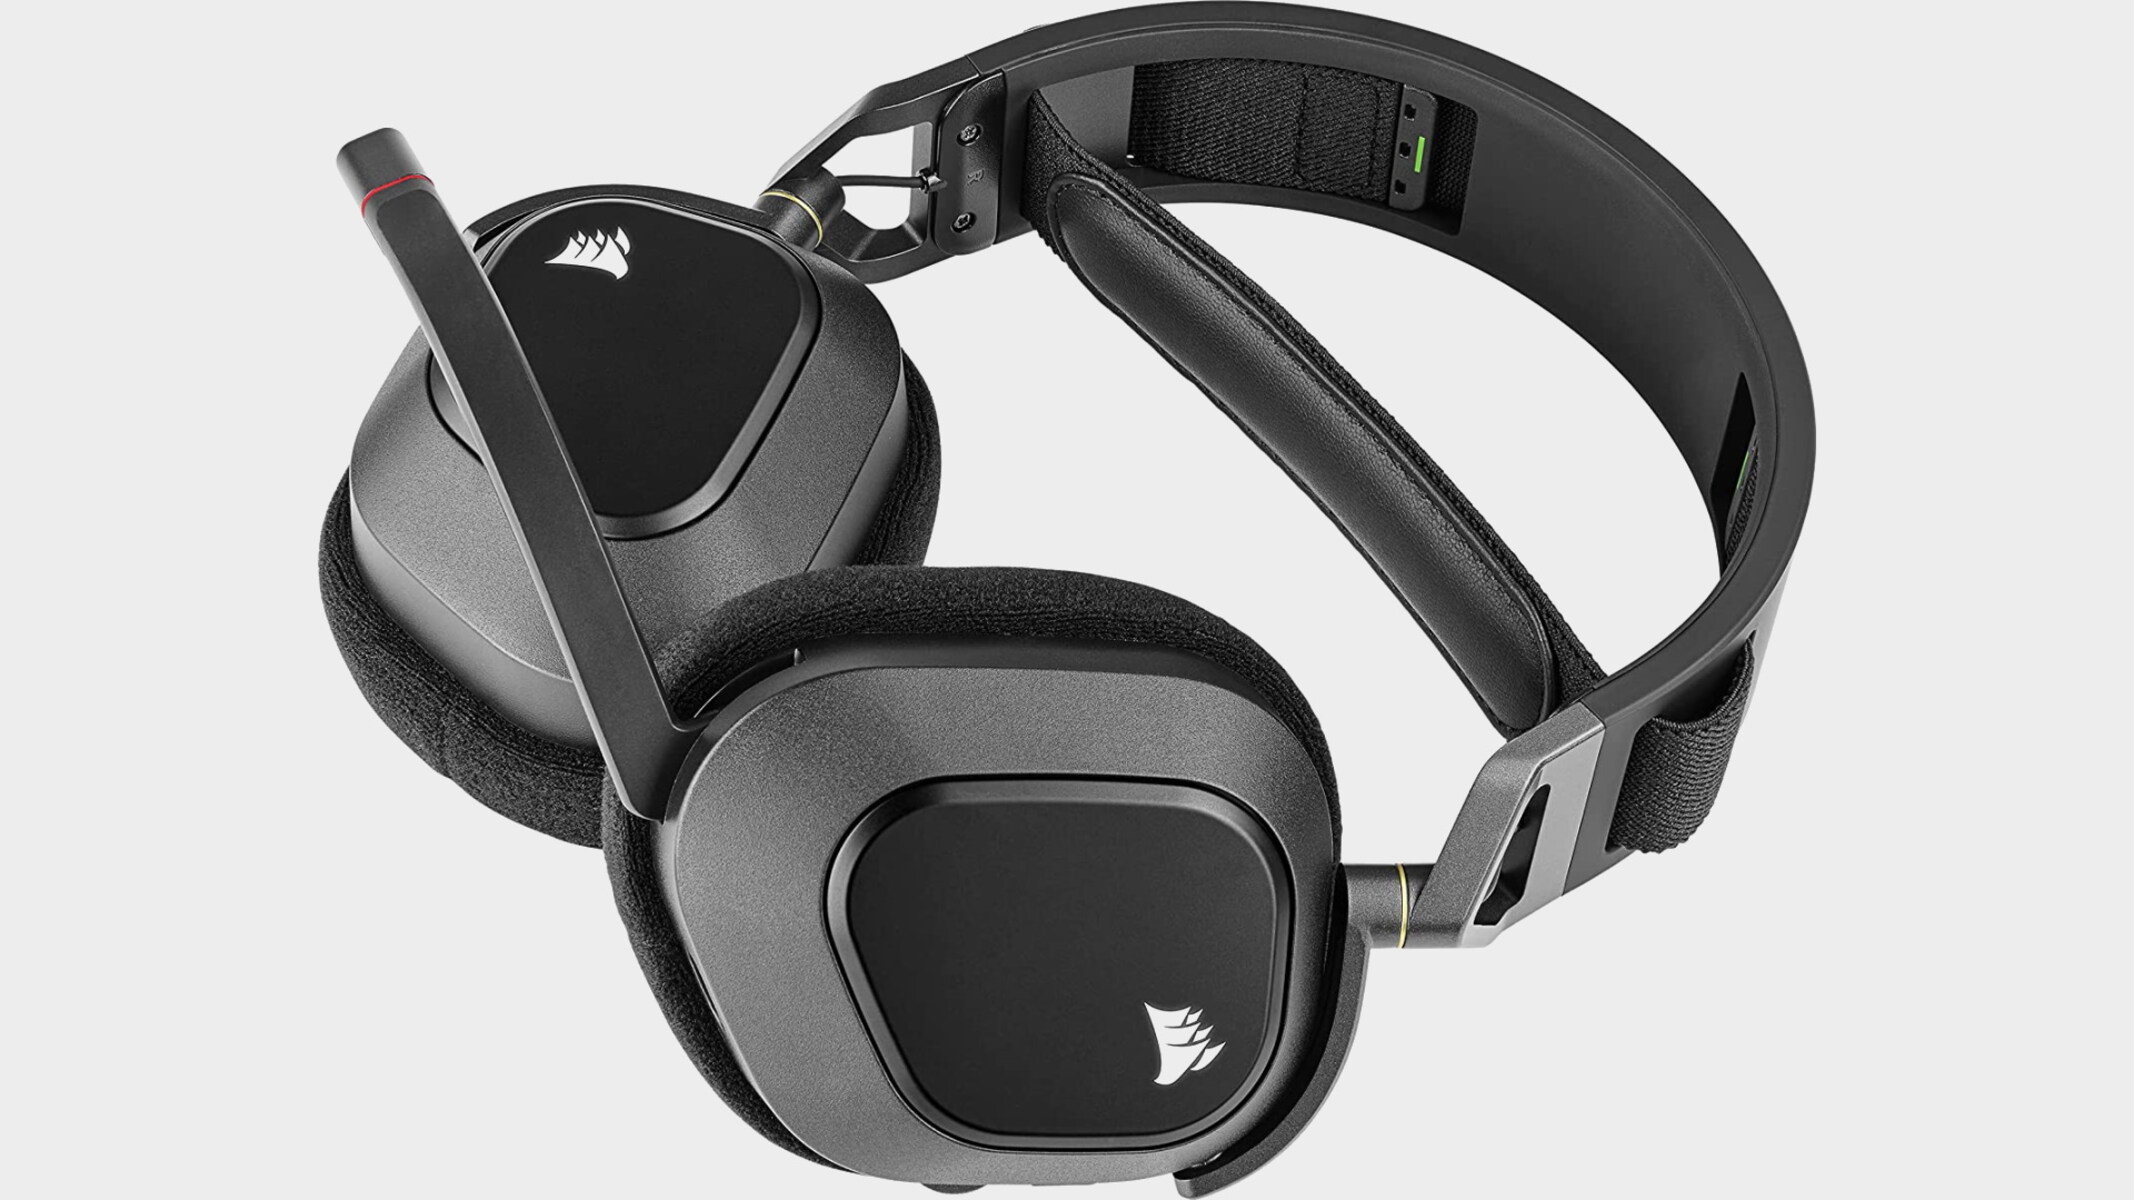 Corsair Gaming Headset: How To Direct Sound To Headset Instead Of Speakers